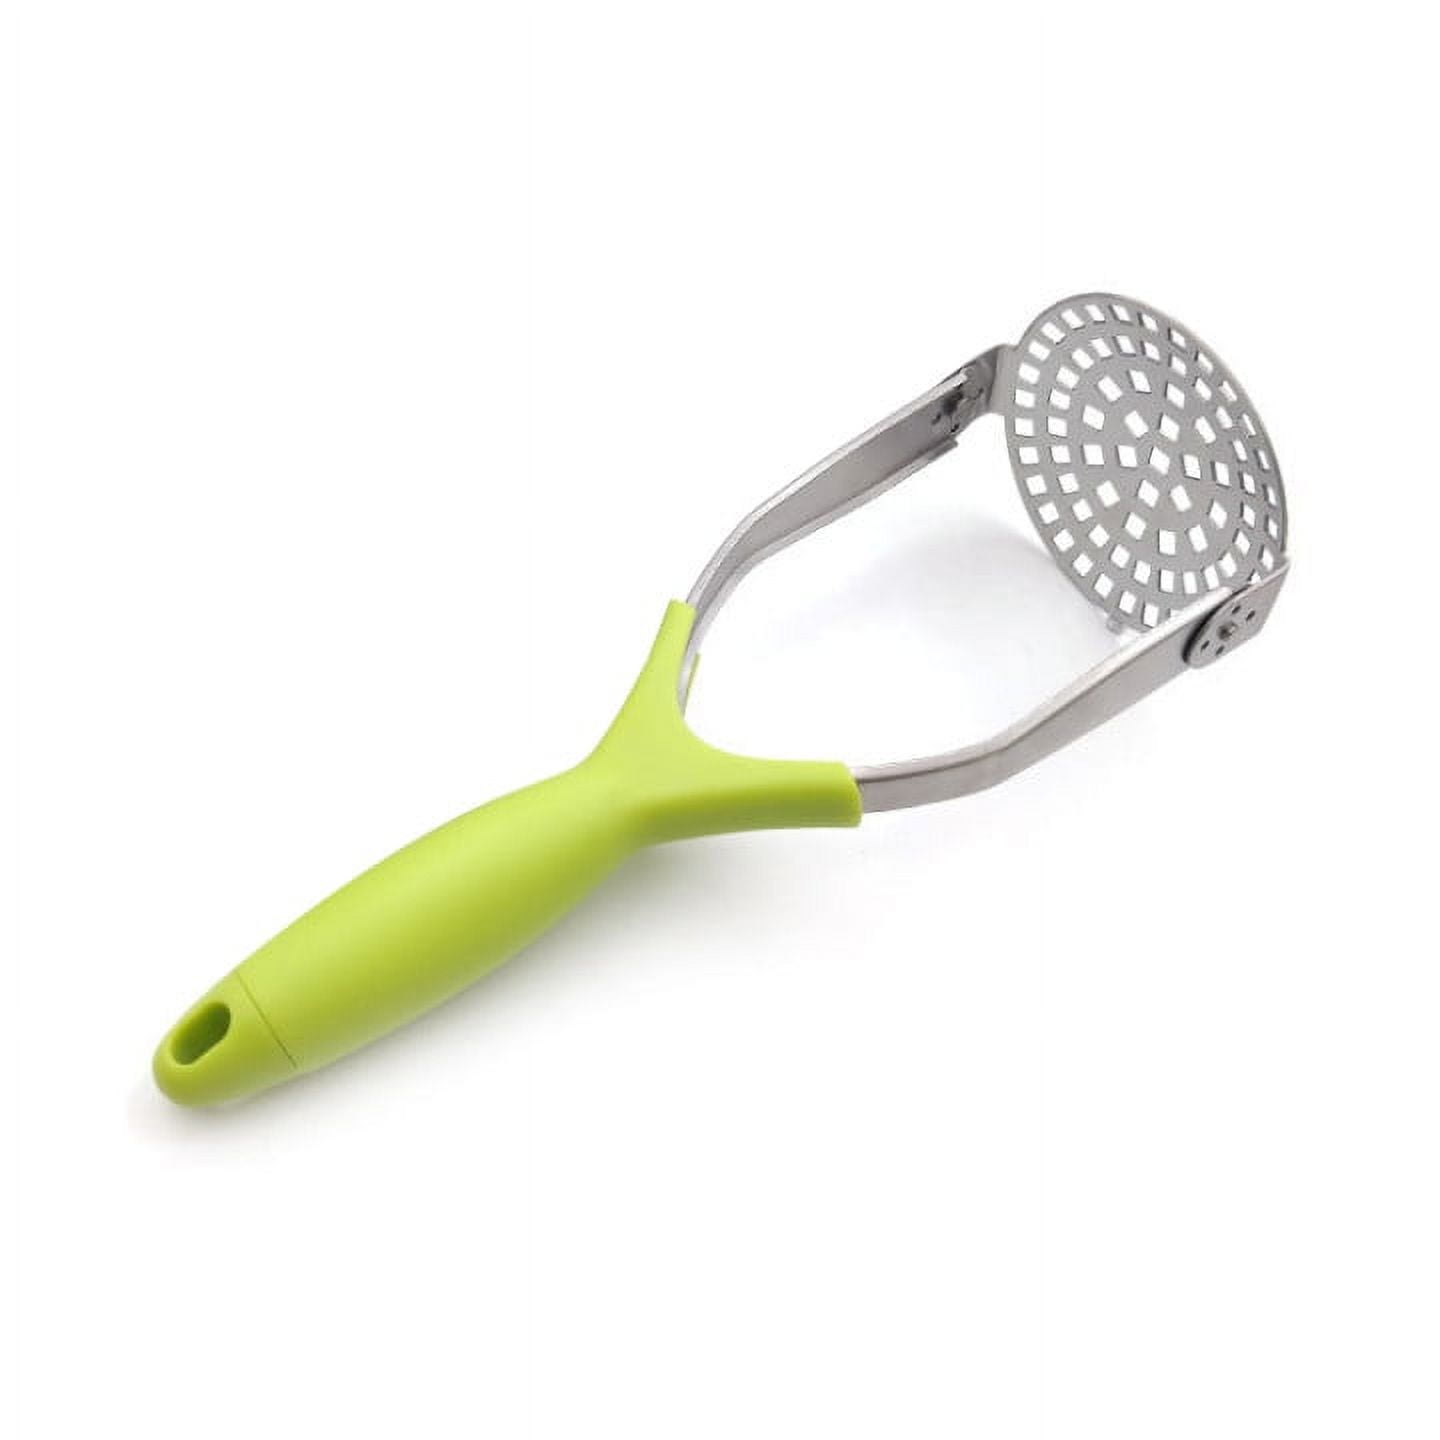 Potato Masher, Manual Spud Smasher Portable Stainless Steel Kitchen Tool  Mashed Mud Kitchen Tools for Vegetables Refried Beans, Baby Food, Fruits,  Bananas, Baking,Yams Potatoes Mesher 